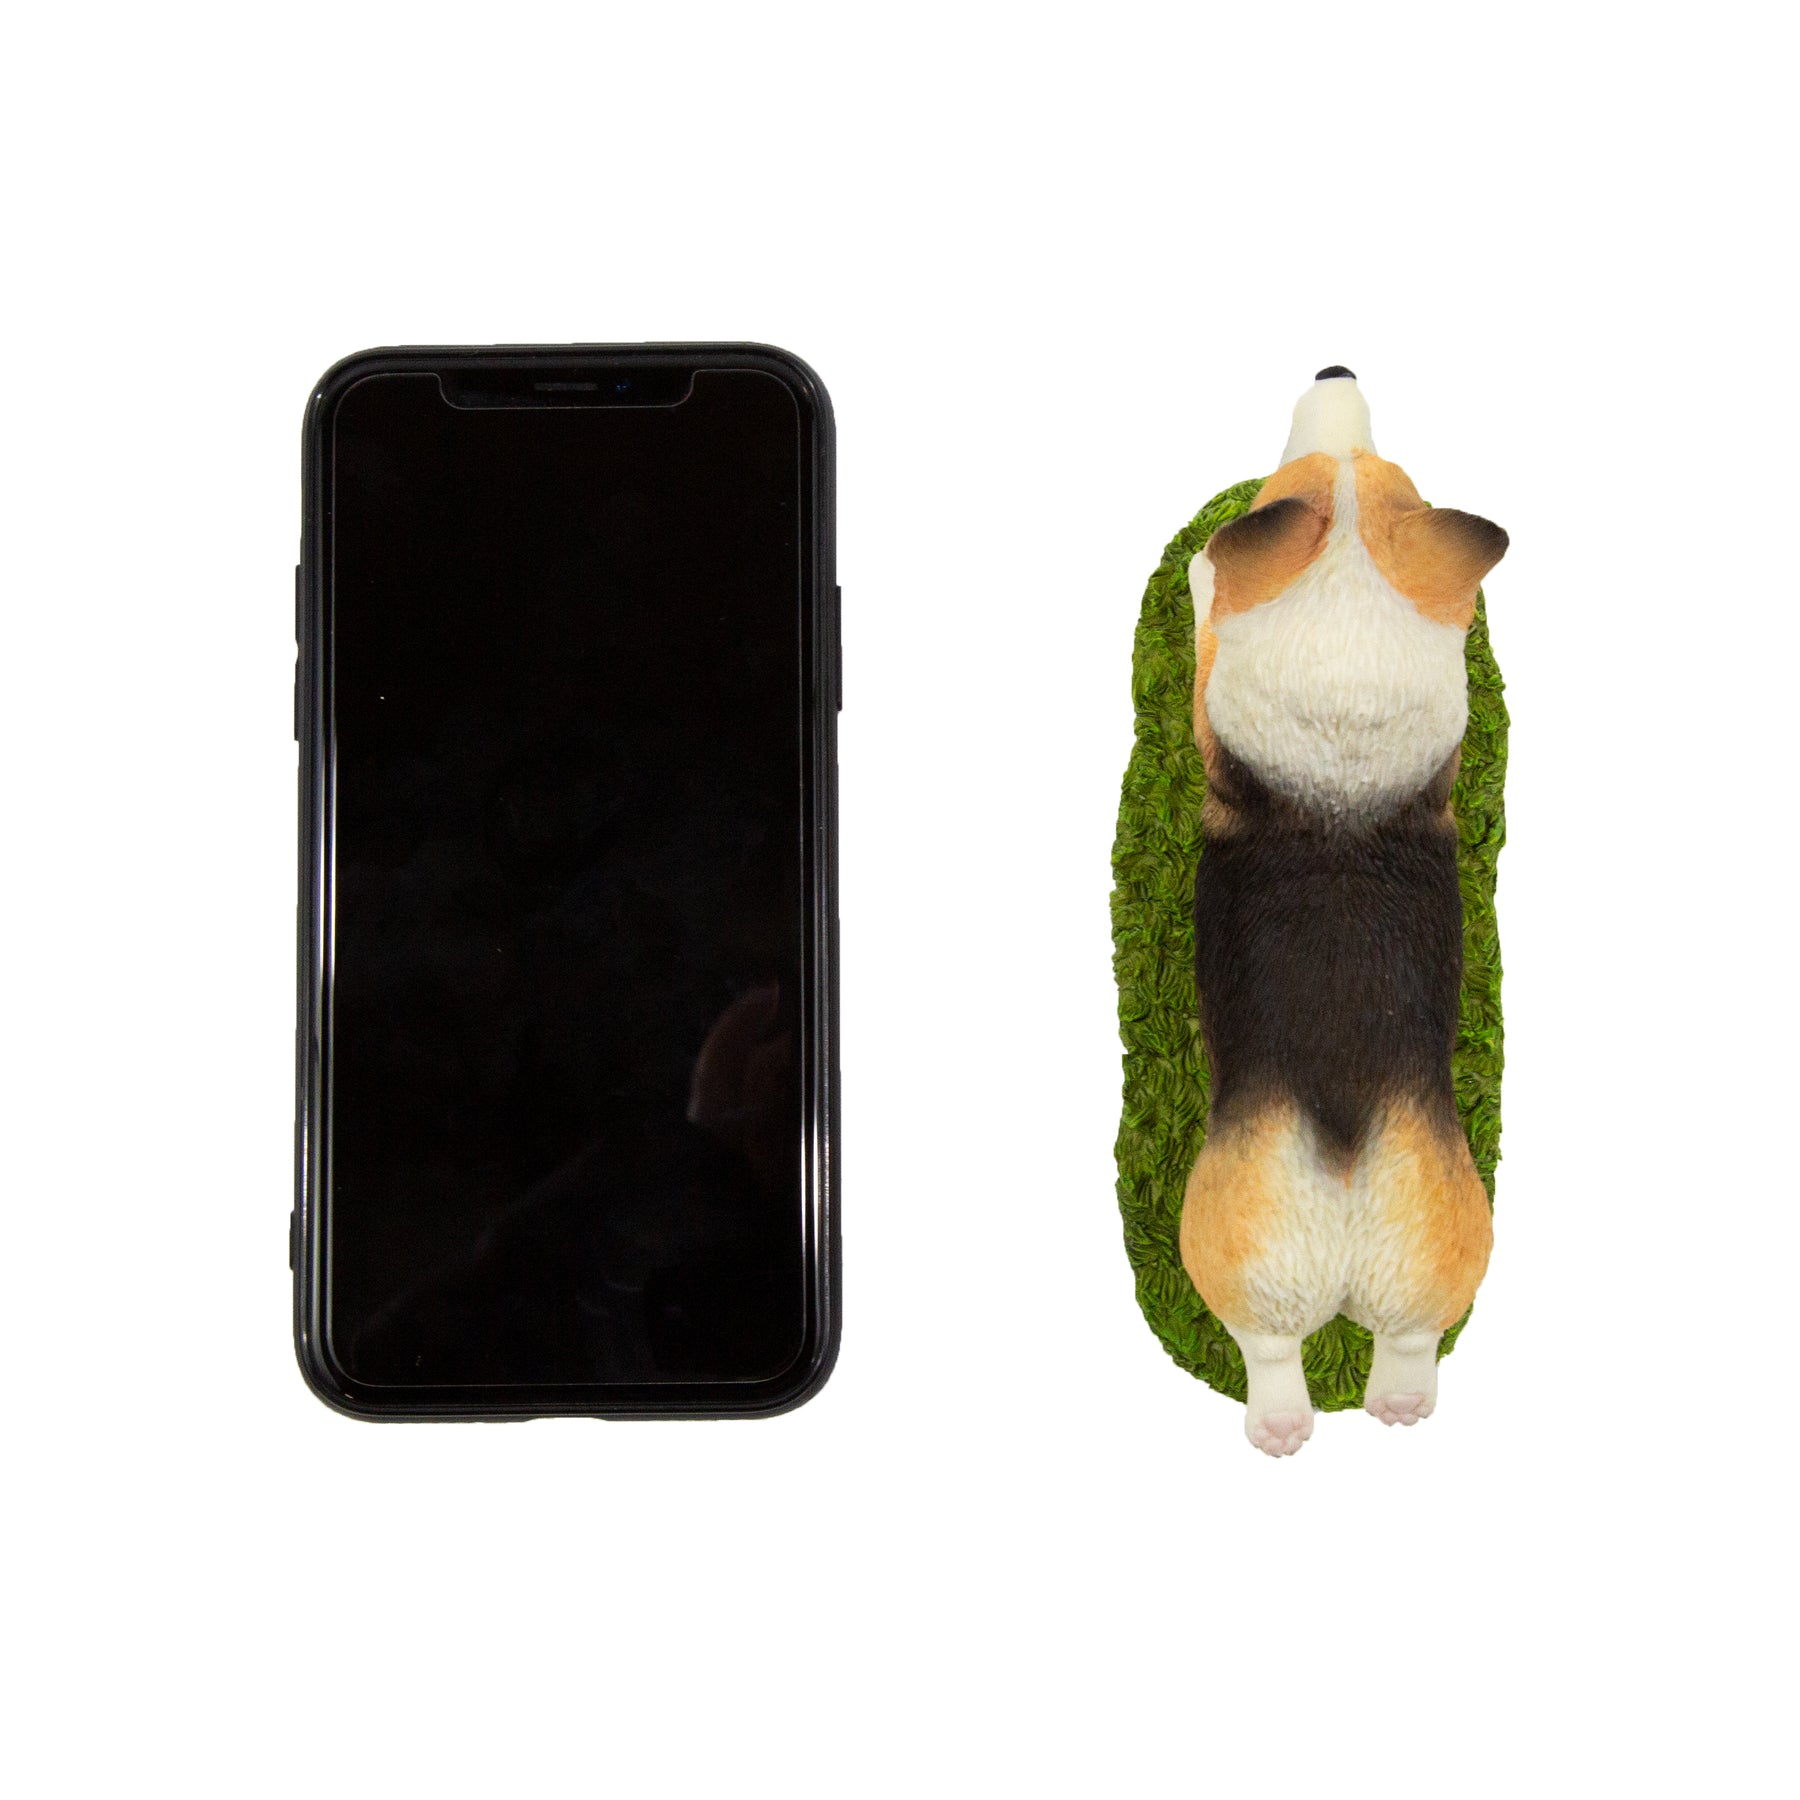 Flying Corgi Figurine next to cellphone for size comparison